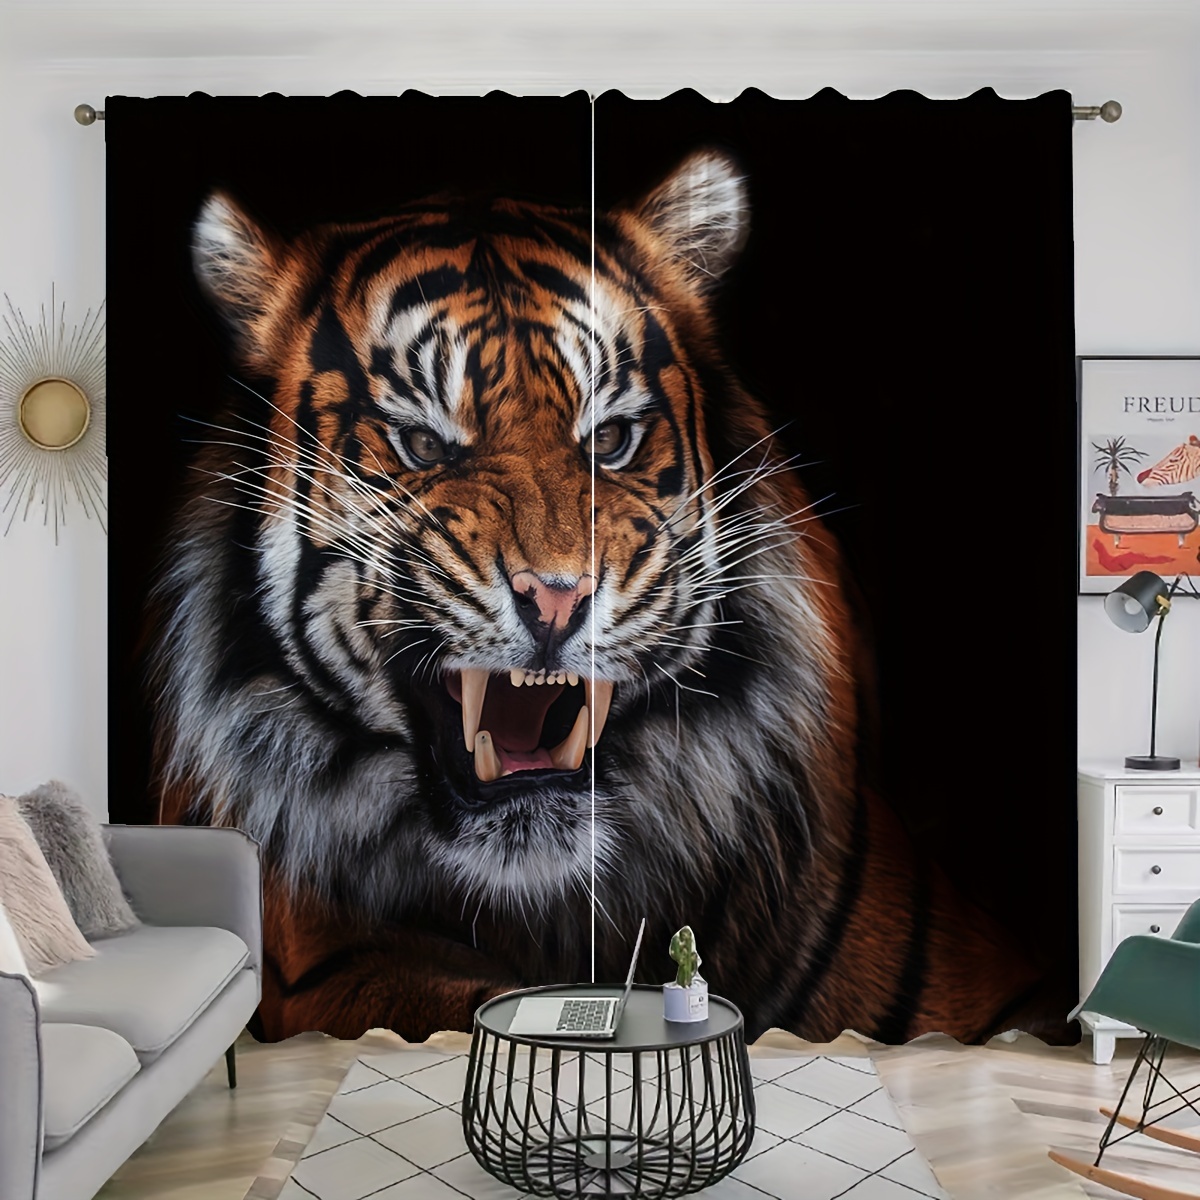 

2pcs, Sumatran Tiger And Tiger Printed Curtains, Rod Pocket Curtain, Suitable For Restaurants, Public Places, Living Rooms, Bedrooms, Offices, Study Rooms, Home Decoration